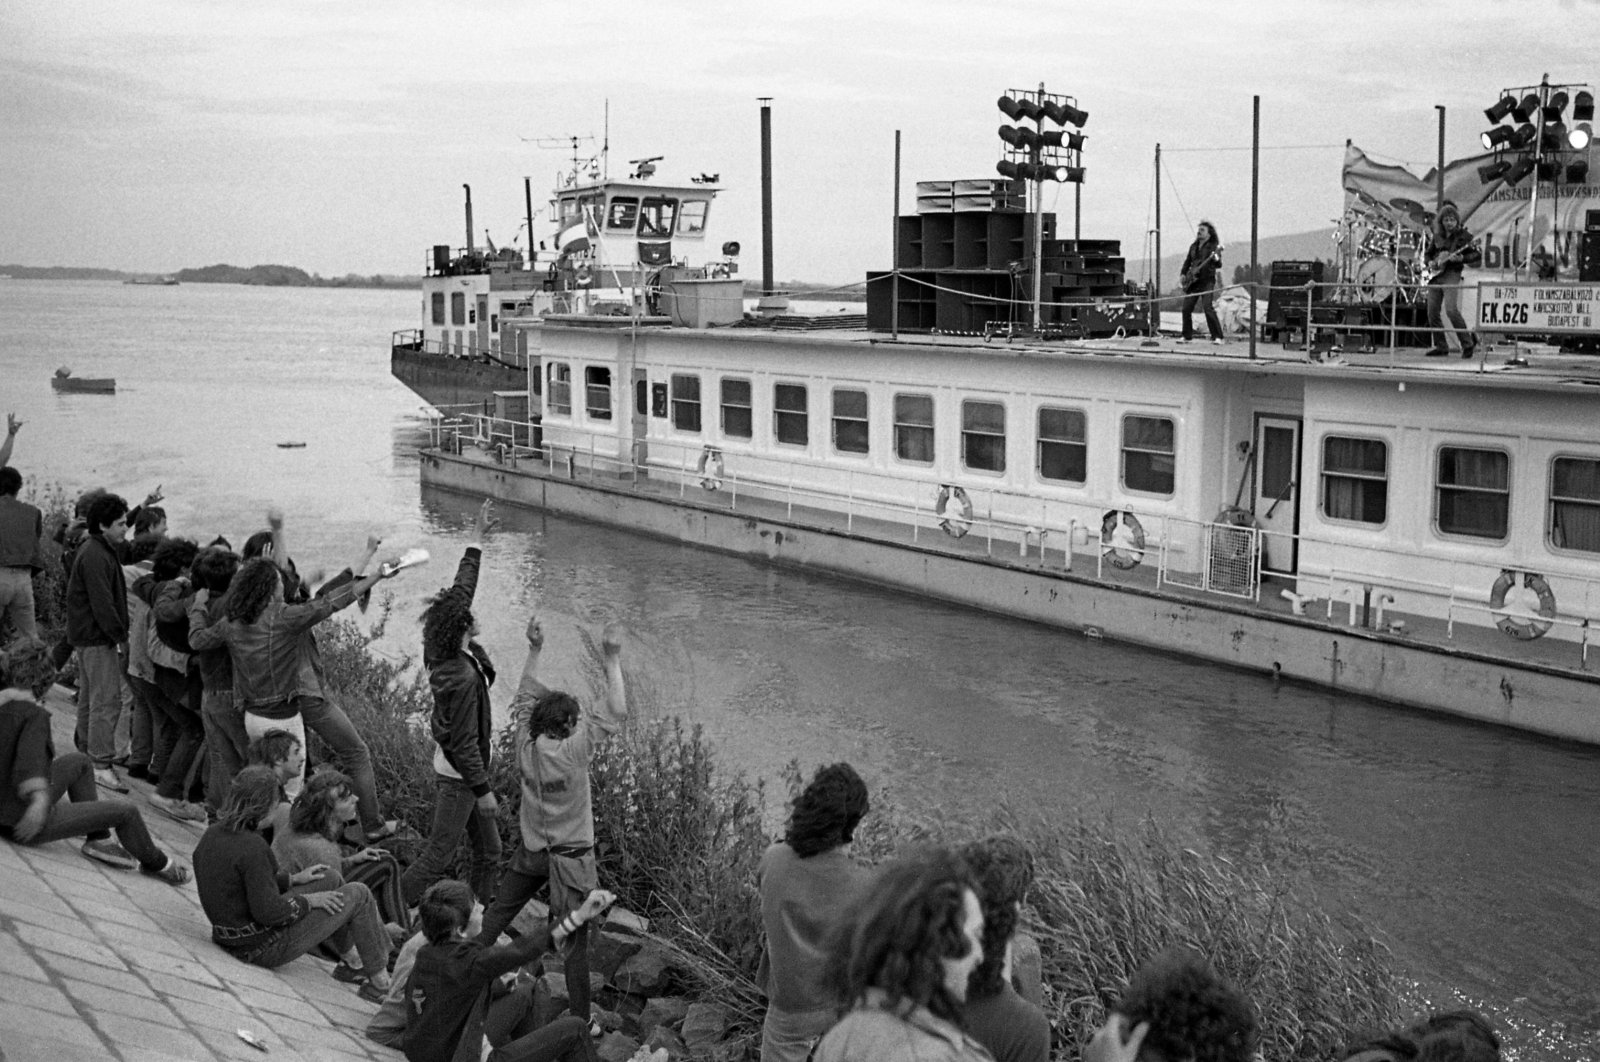 This old photo showing people listening to a concert by the Danube river is one of the photos on display at the exhibition. (Courtesy of Hungarian Cultural Center)